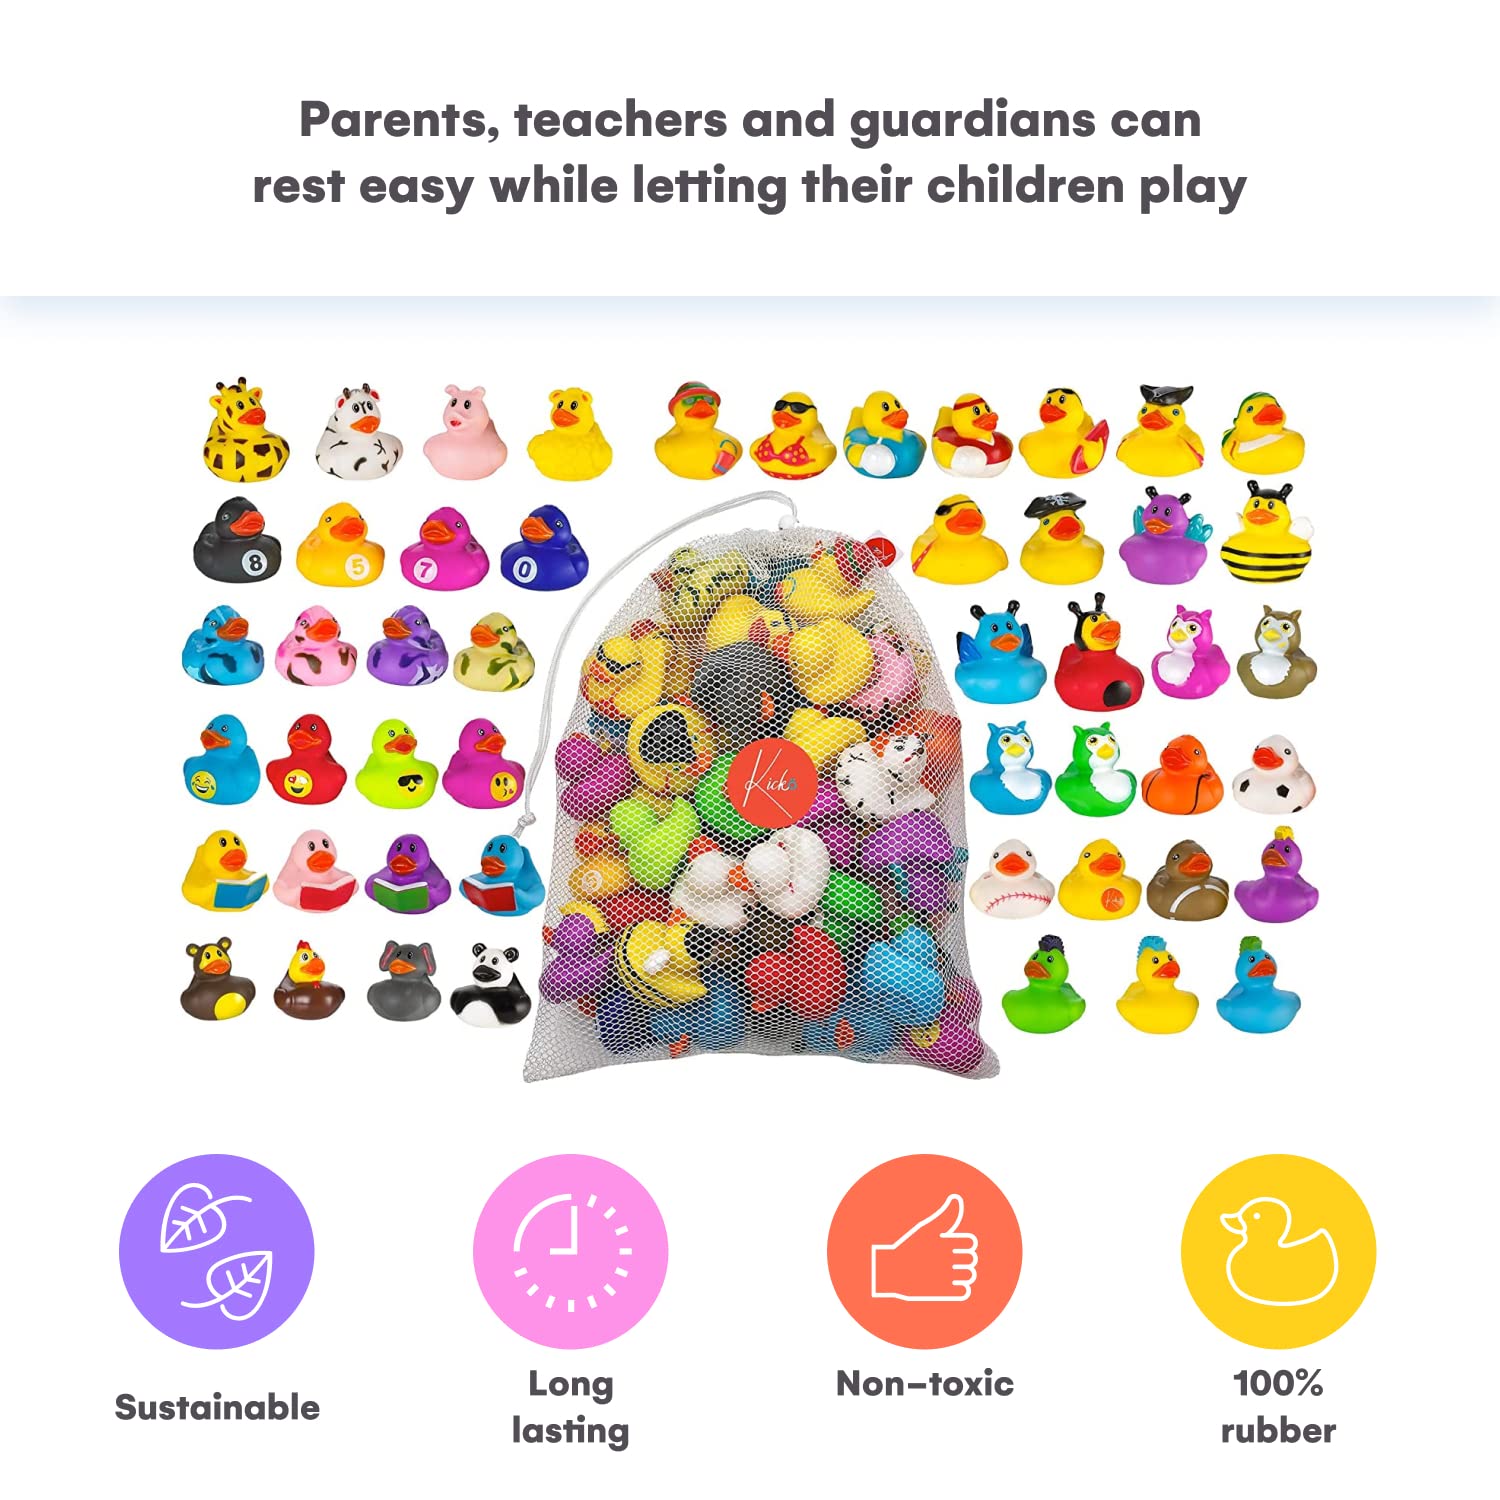 Kicko Assorted Rubber Ducks in Bulk - 50 Pack - 2 Inches - for Kids, Sensory Play, Stress Relief, Stocking Stuffers, Classroom Prizes, Decorations, Supplies, Holidays, Pinata Filler, and Rewards